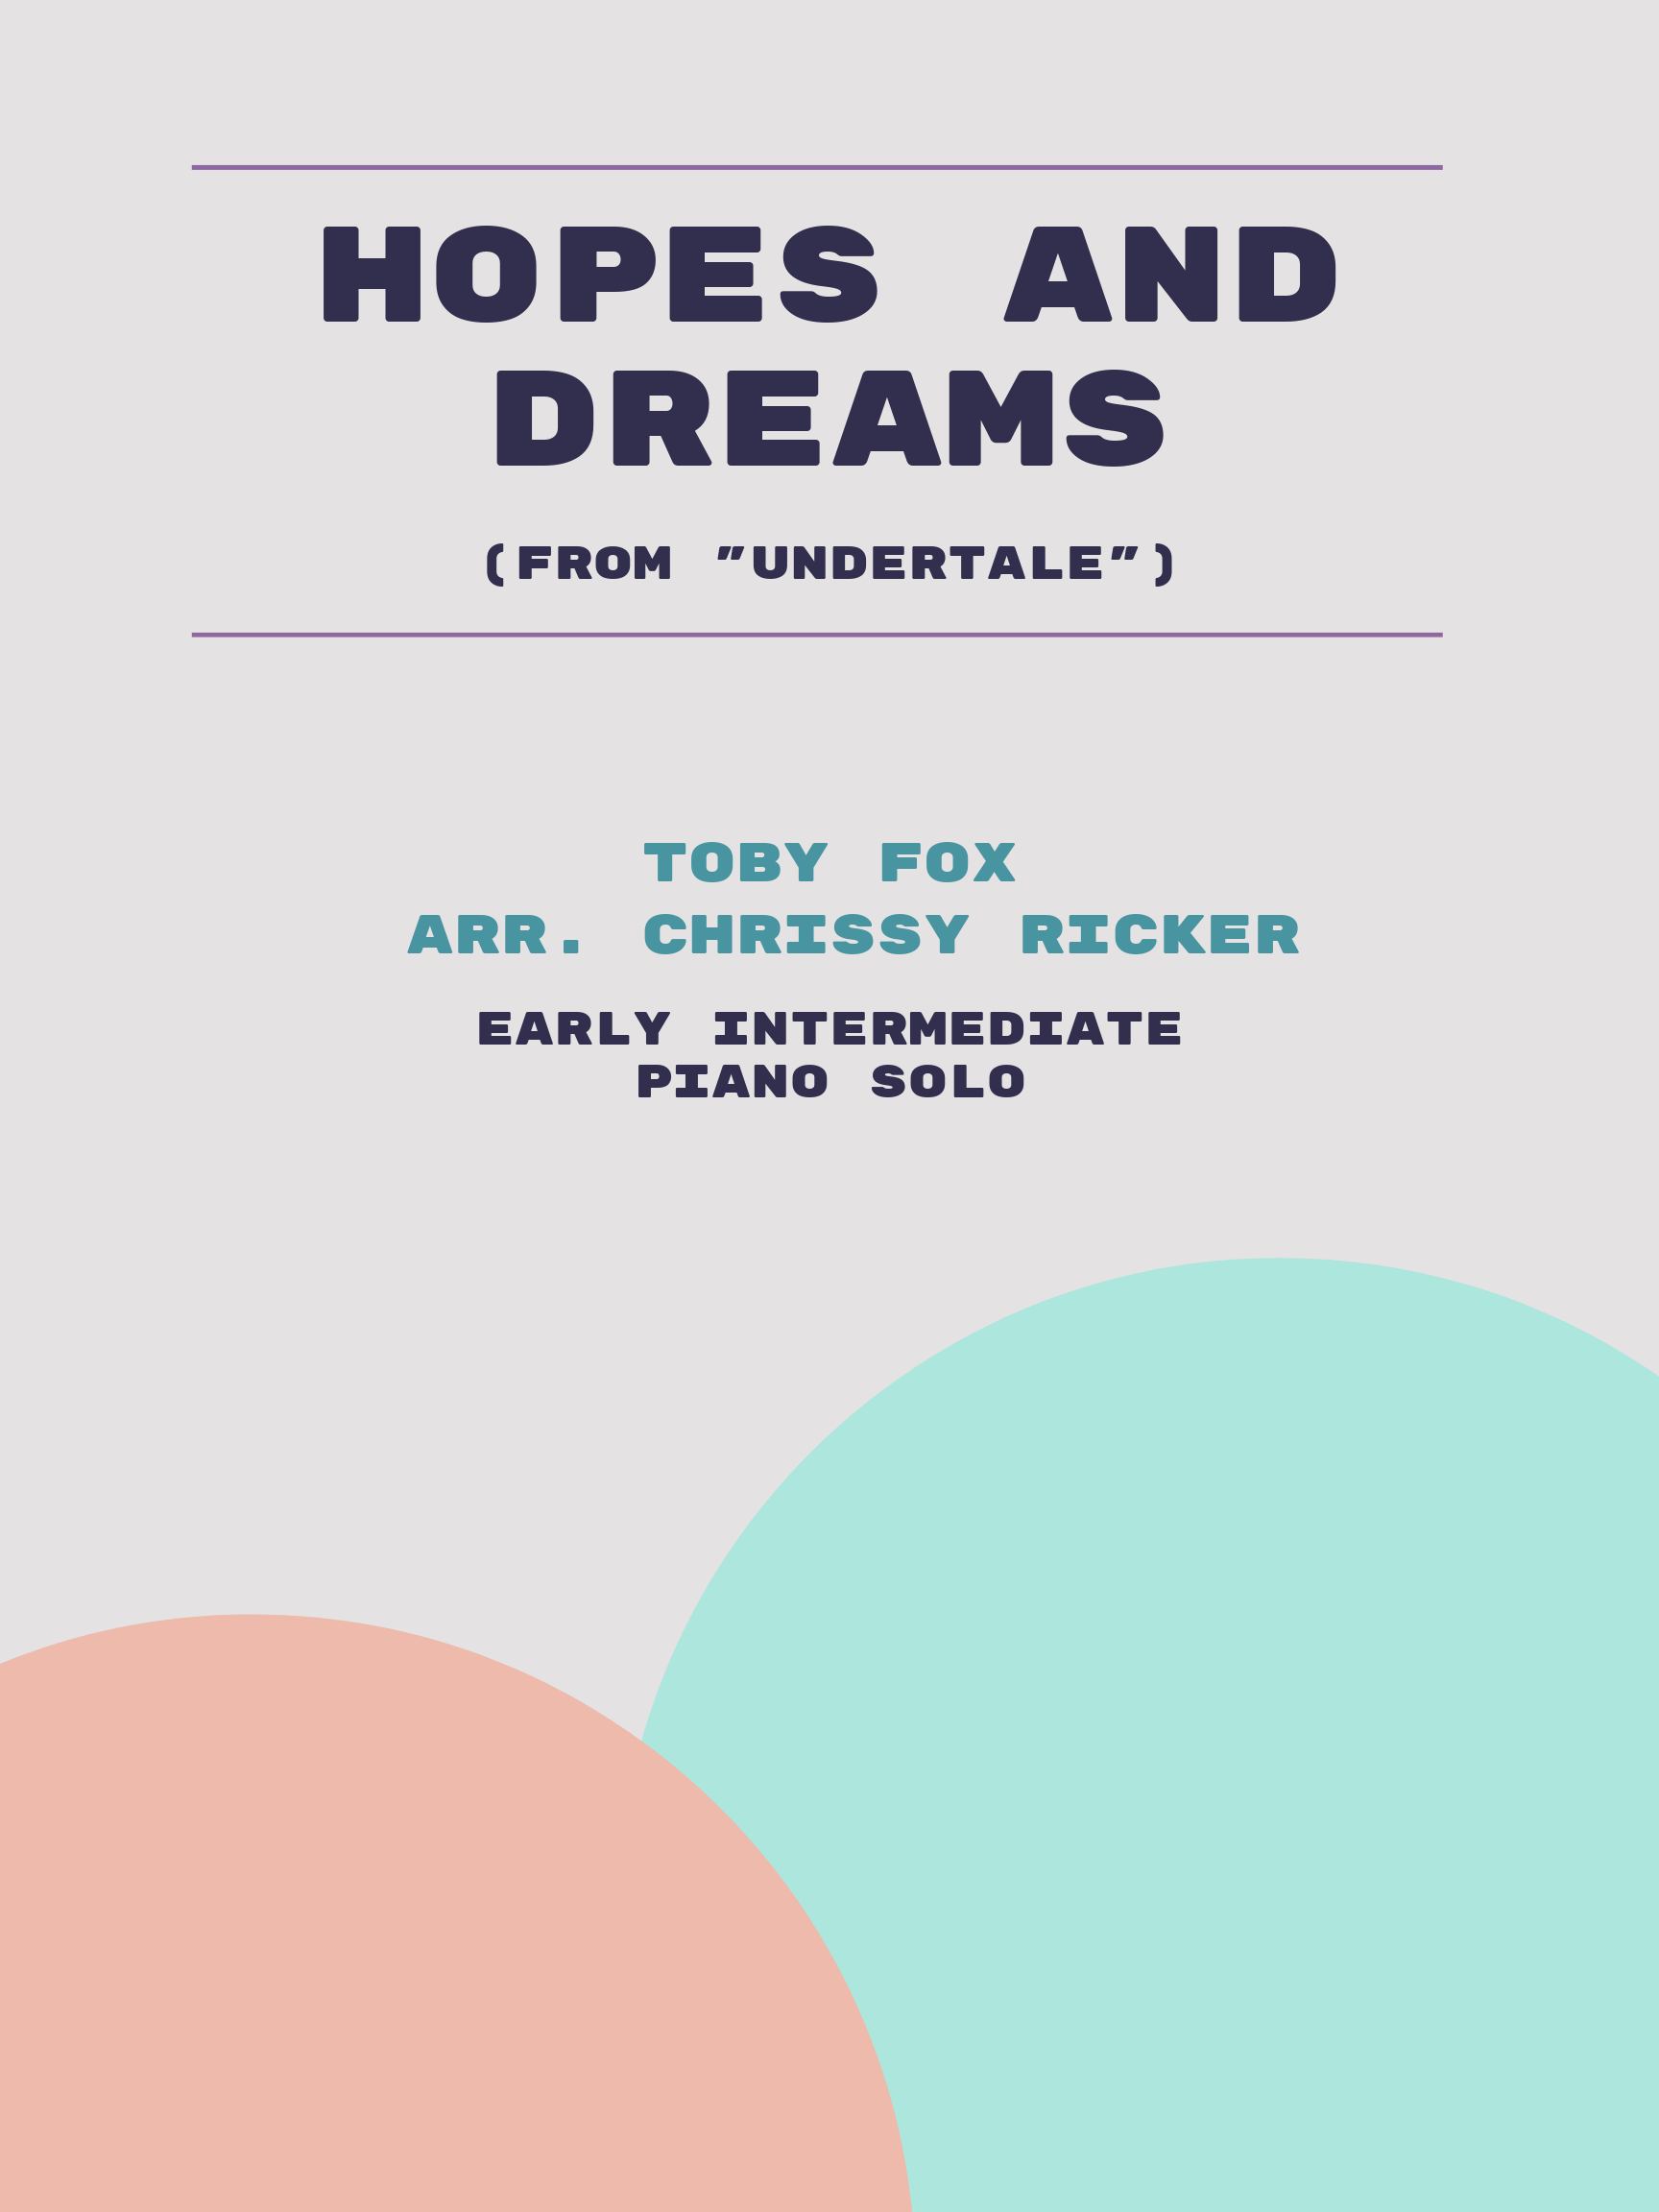 Hopes and Dreams by Toby Fox